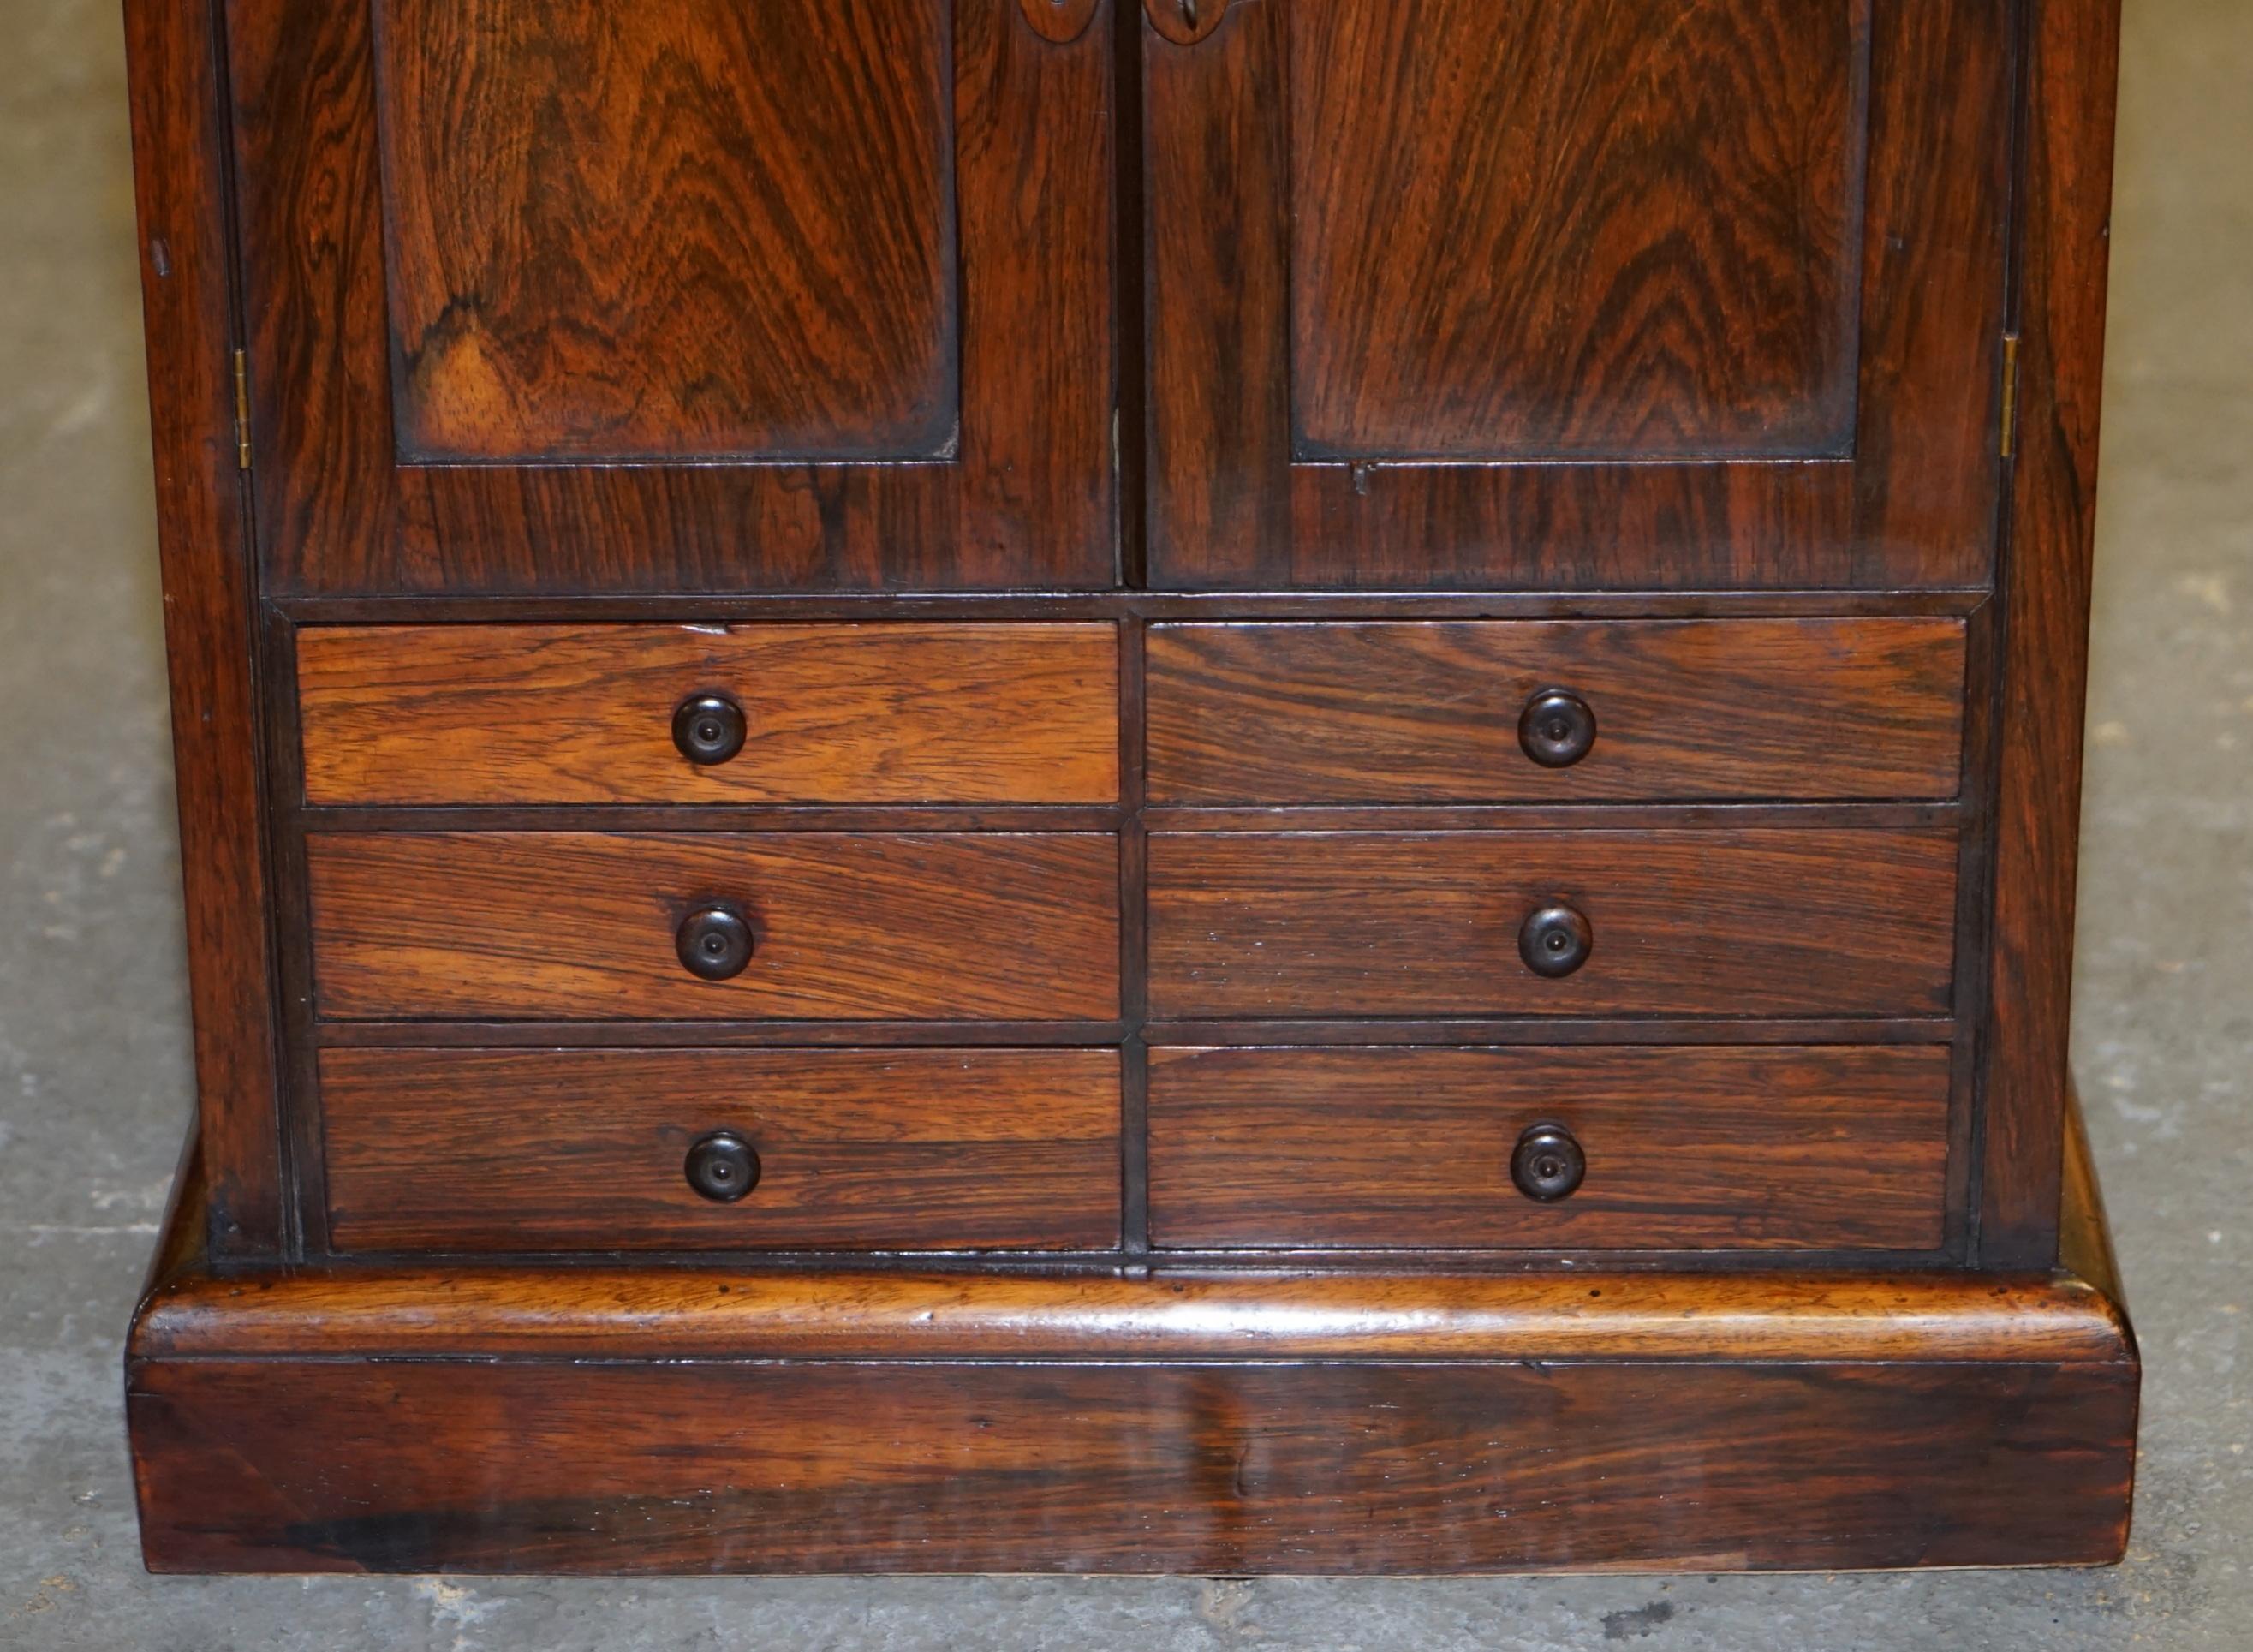 RARE WILLIAM IV CIRCA 1830 HARDWOOD LIBRARY FOLIO CABiNET WITH DRAWERS BOOKCASE For Sale 2